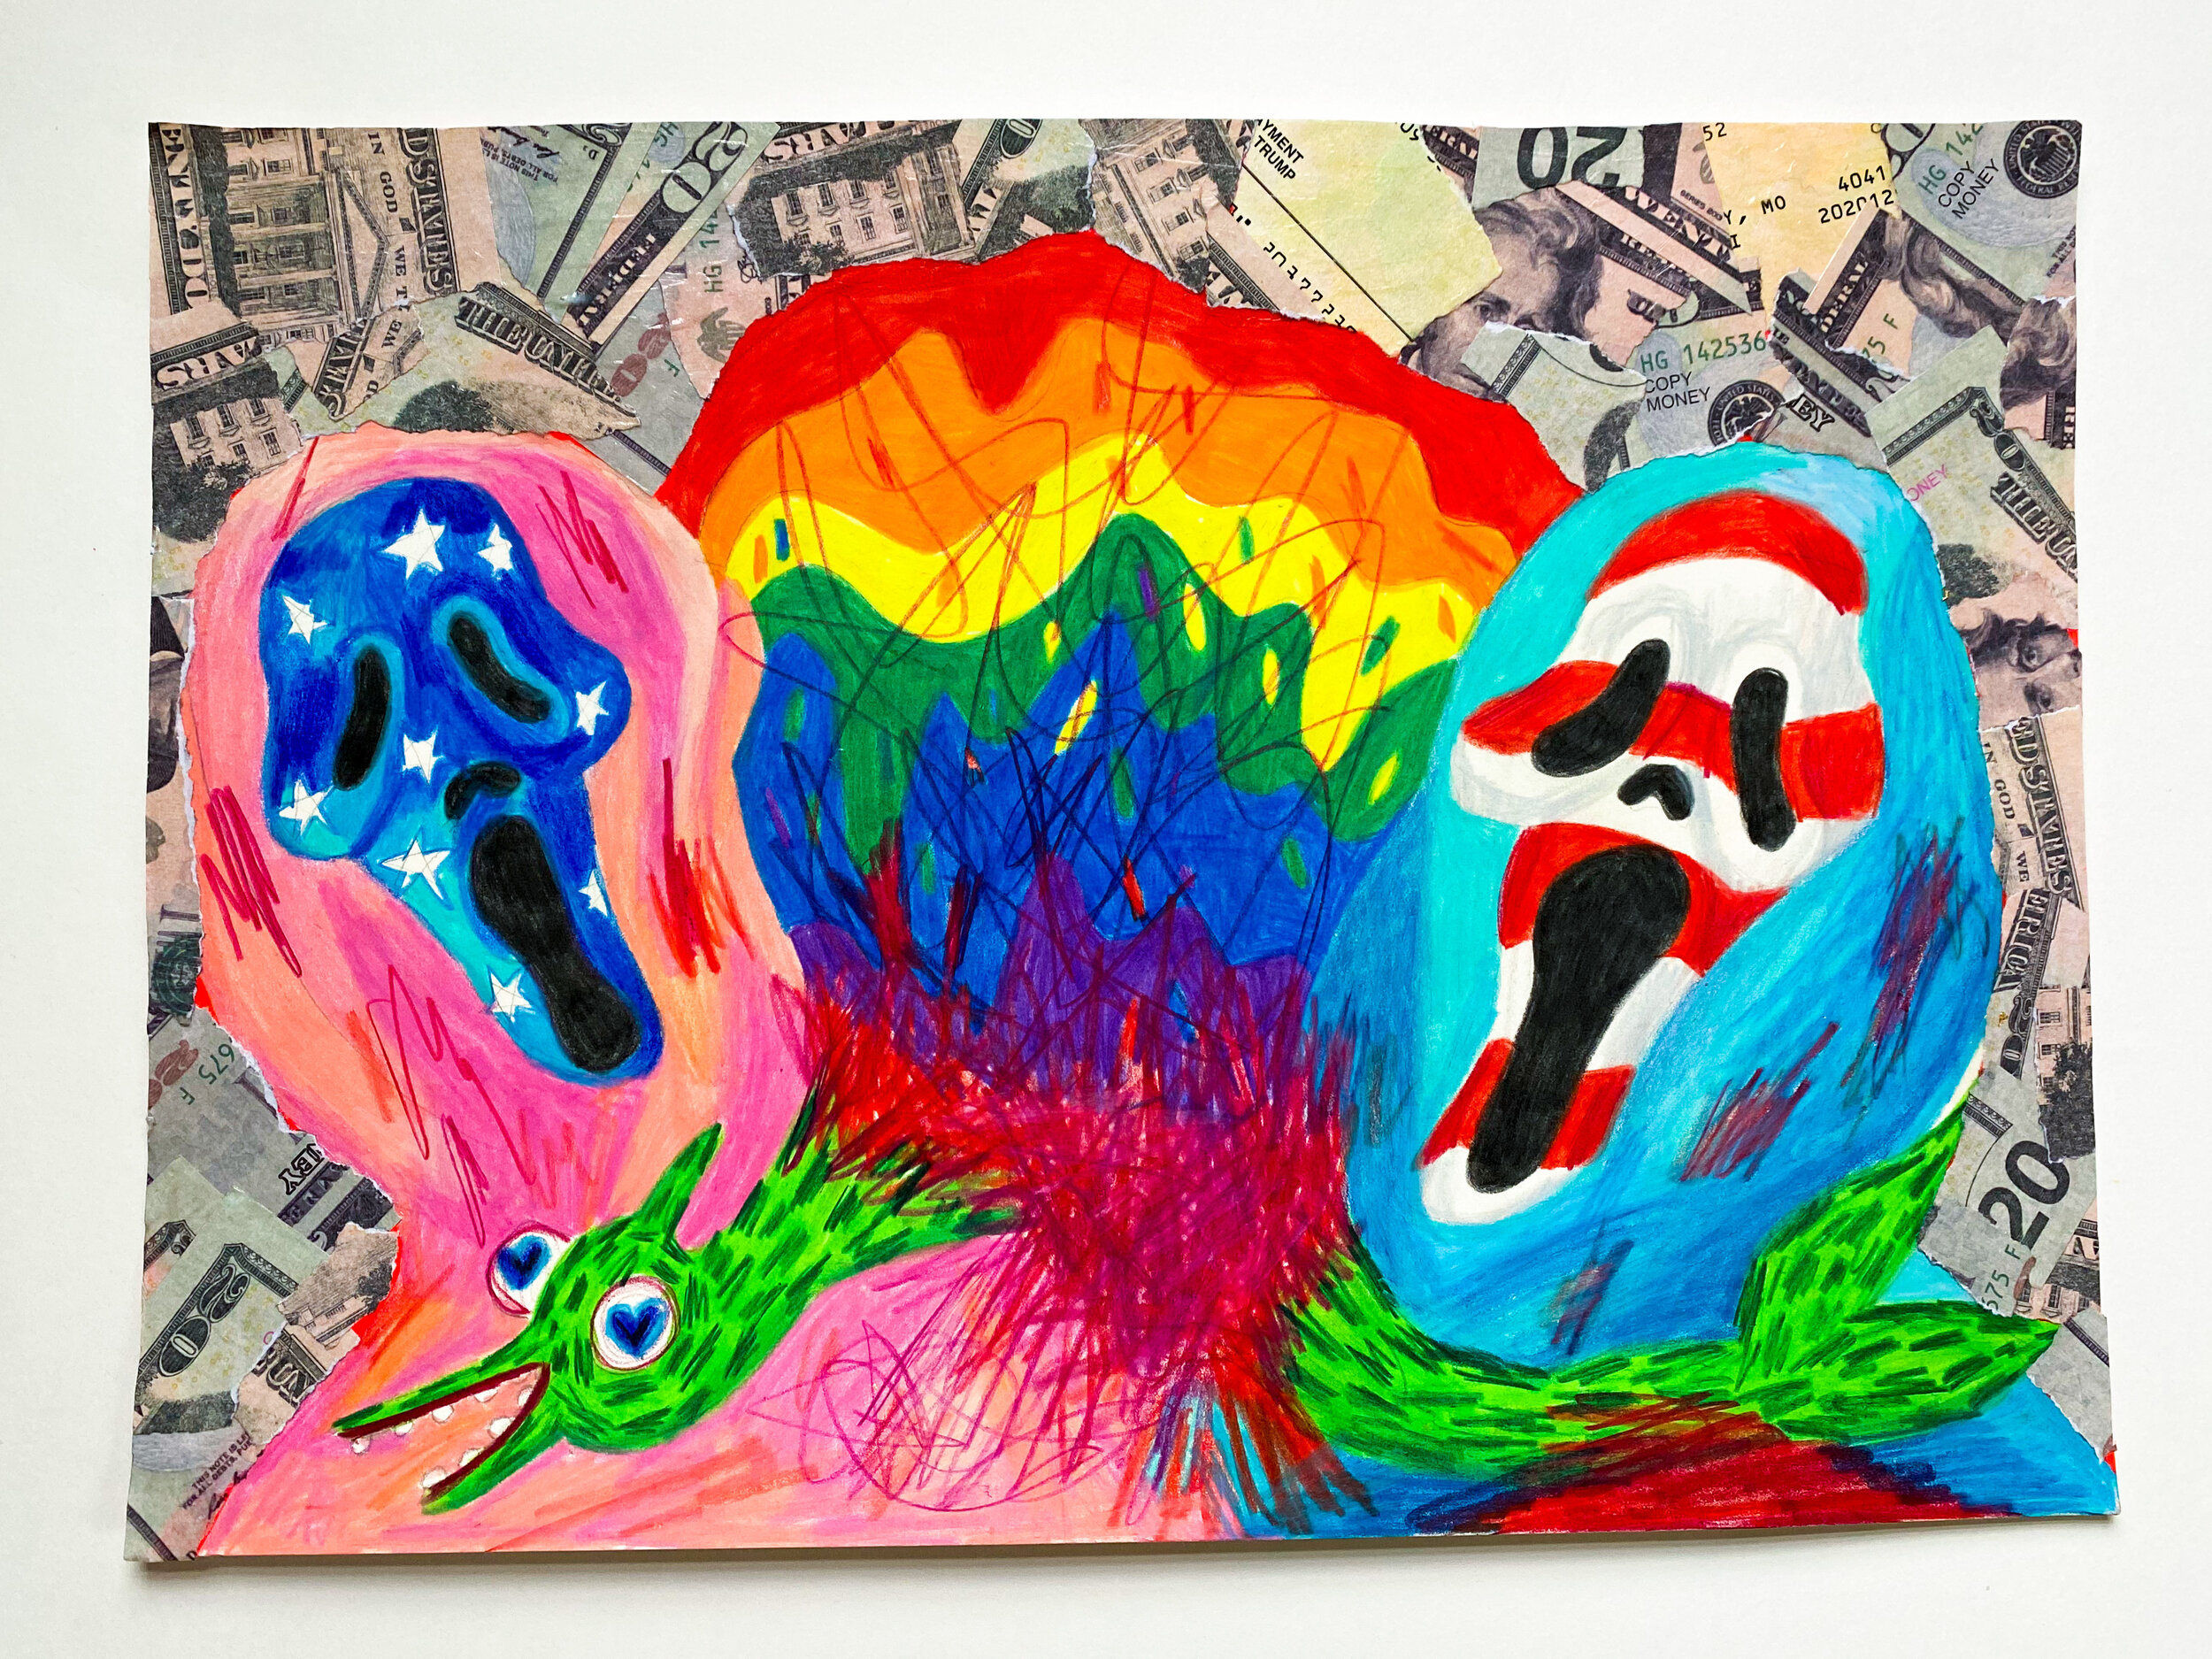   Face Painted Scream Masks and Exploded Alien Dolphin,  2020  11 x 14 inches (27.94 x 35.56 cm.)  Colored pencil, Modge Podge, acrylic paint, stimulus check, and fake money on paper  Private collection 